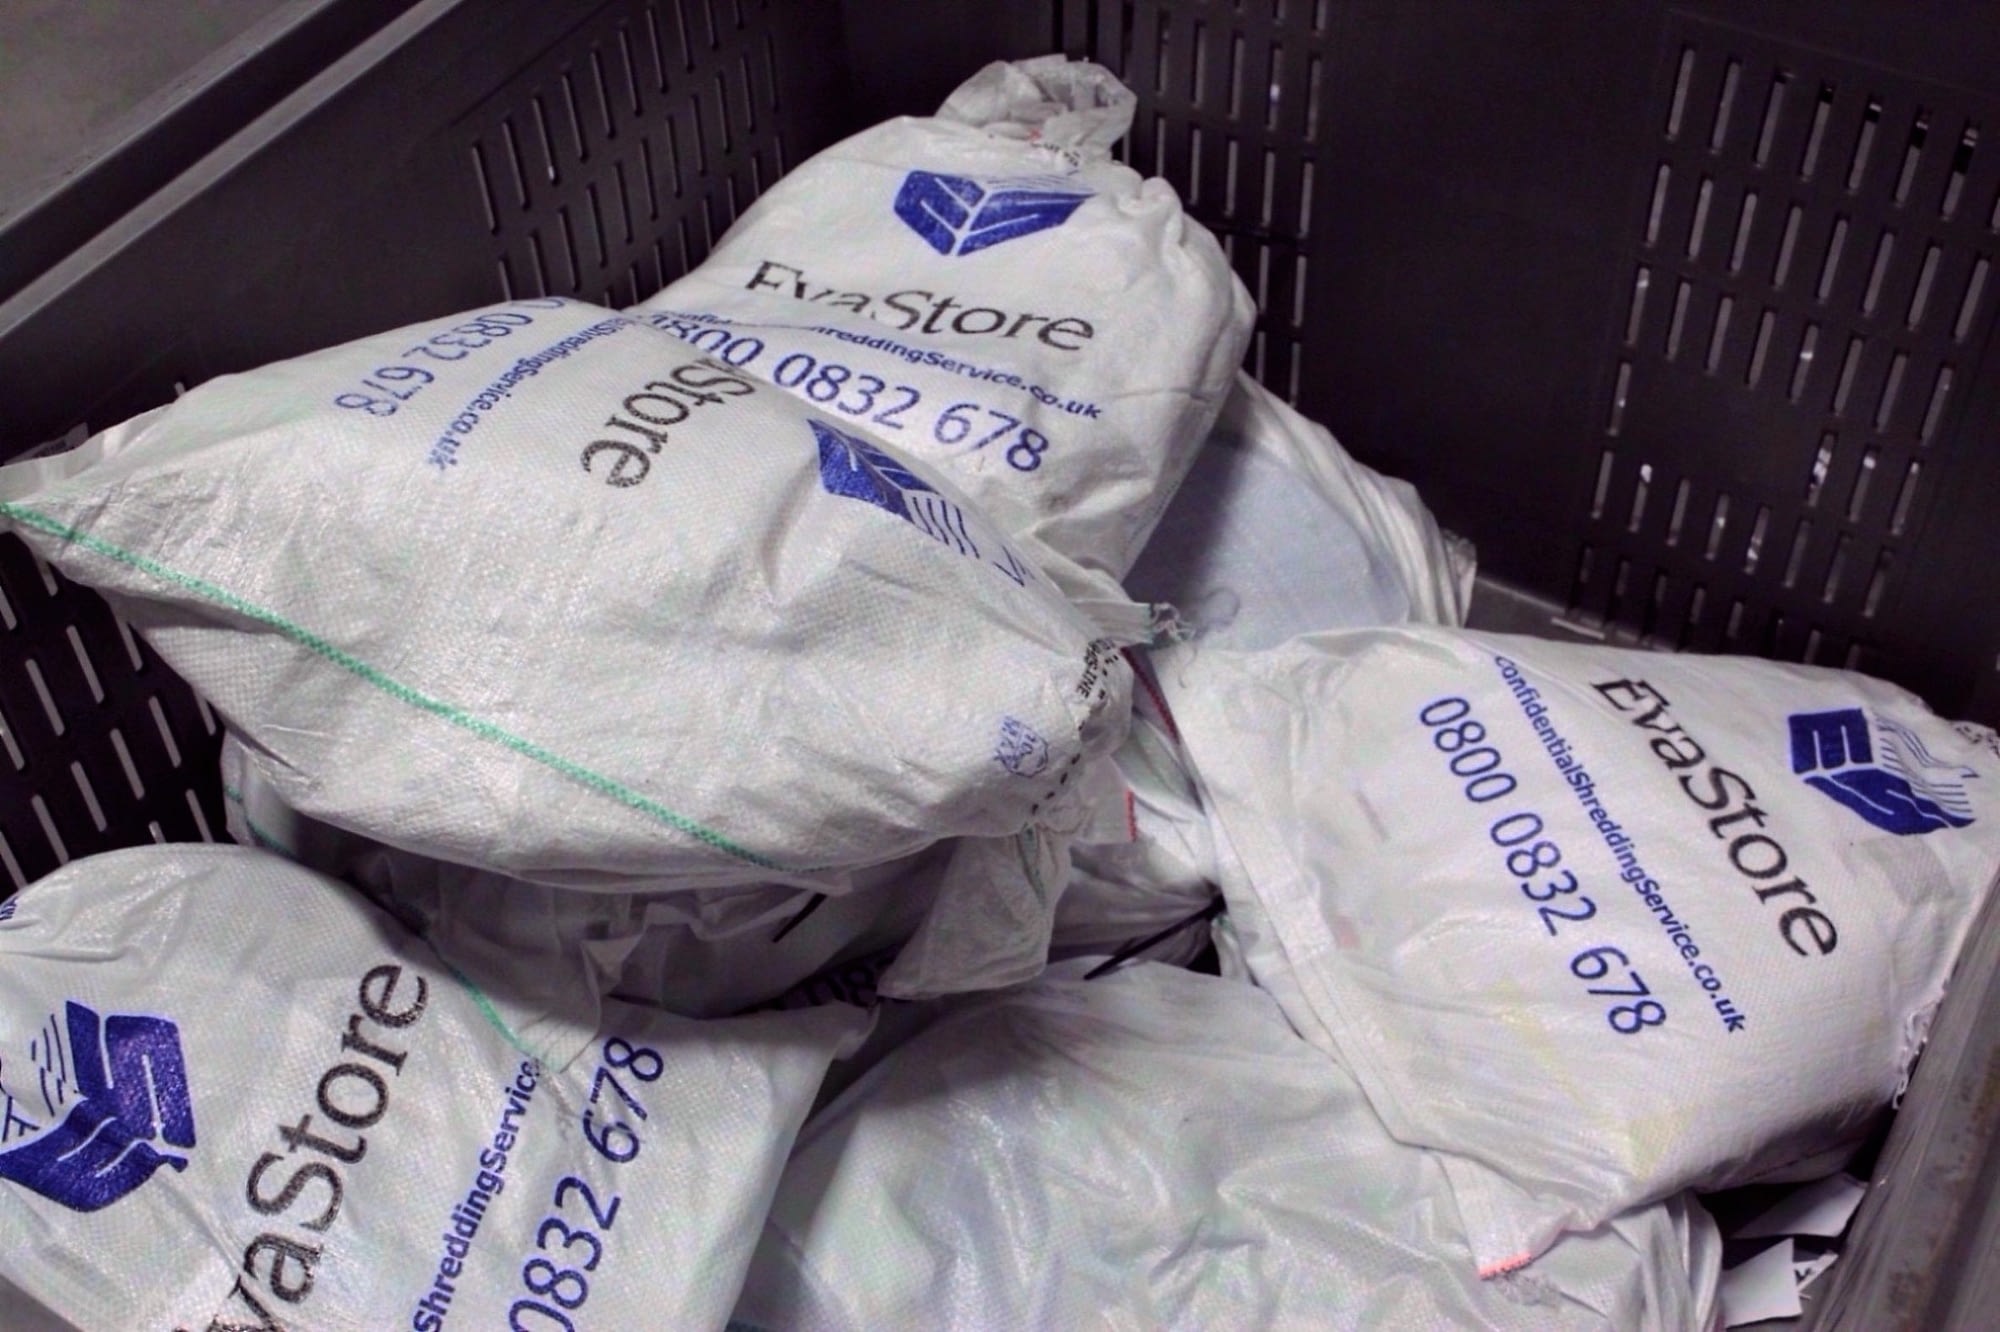 Bags of Shredded Documents